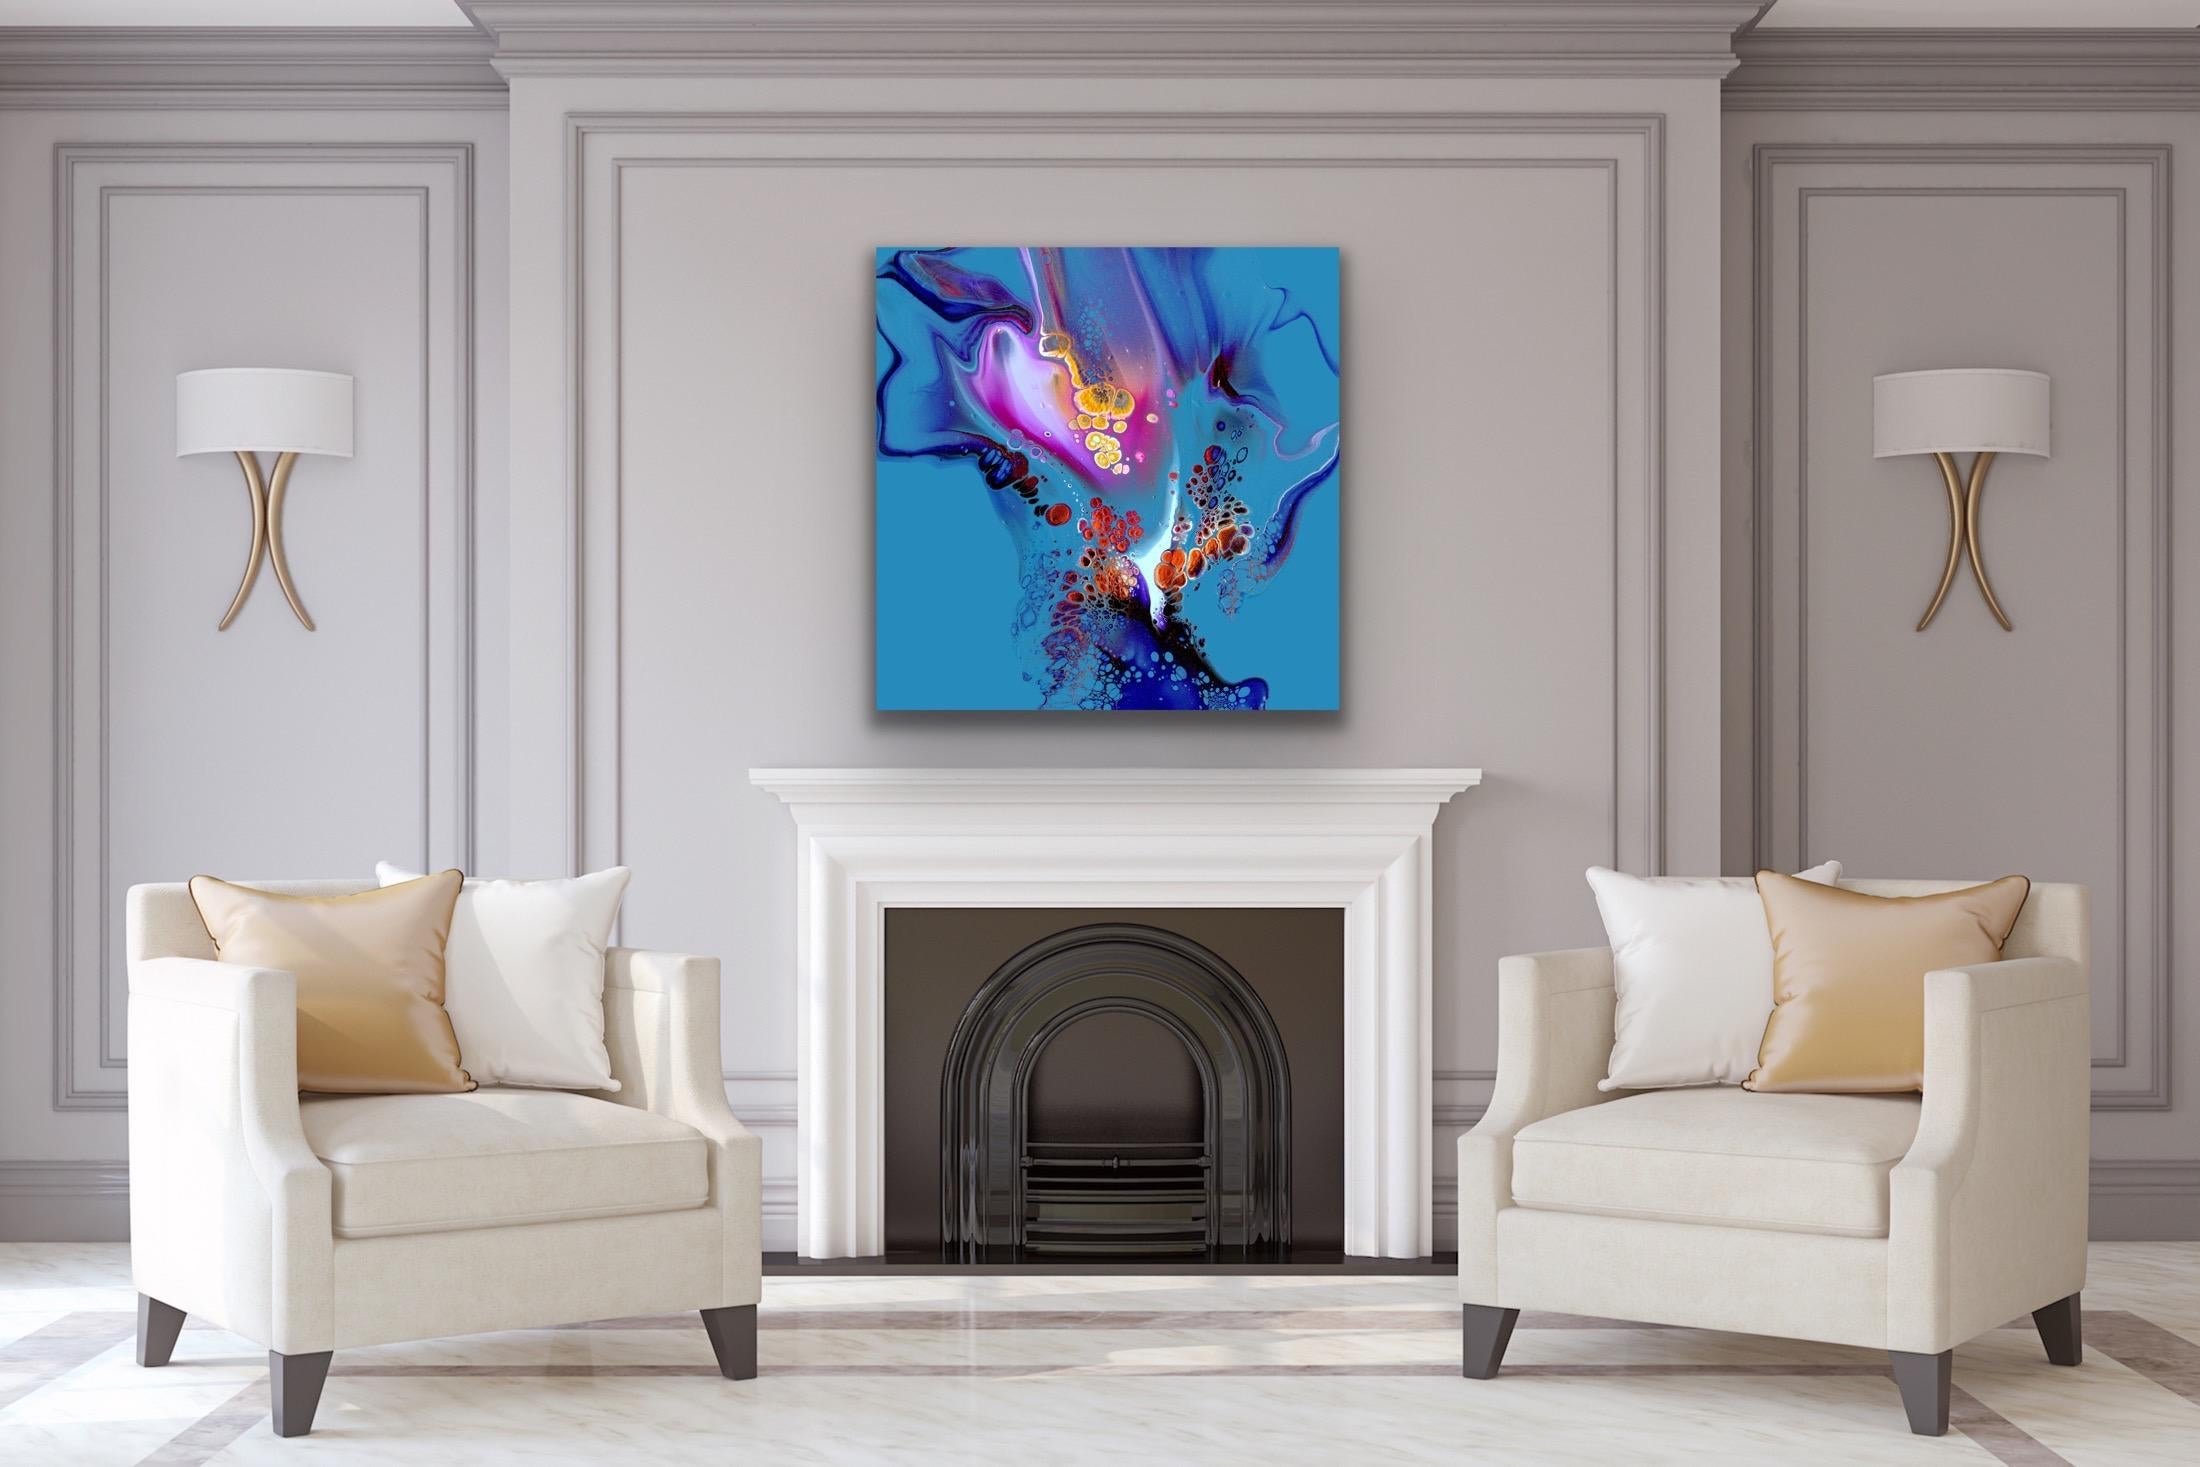 This contemporary colorful abstract painting is printed on a lightweight metal composite and comes signed by the hand-artist and ready to hang. 

-Title: Ignition 
-Artist: Celeste Reiter
LIMITED EDITION; 1 of 50
*This piece is a limited edition